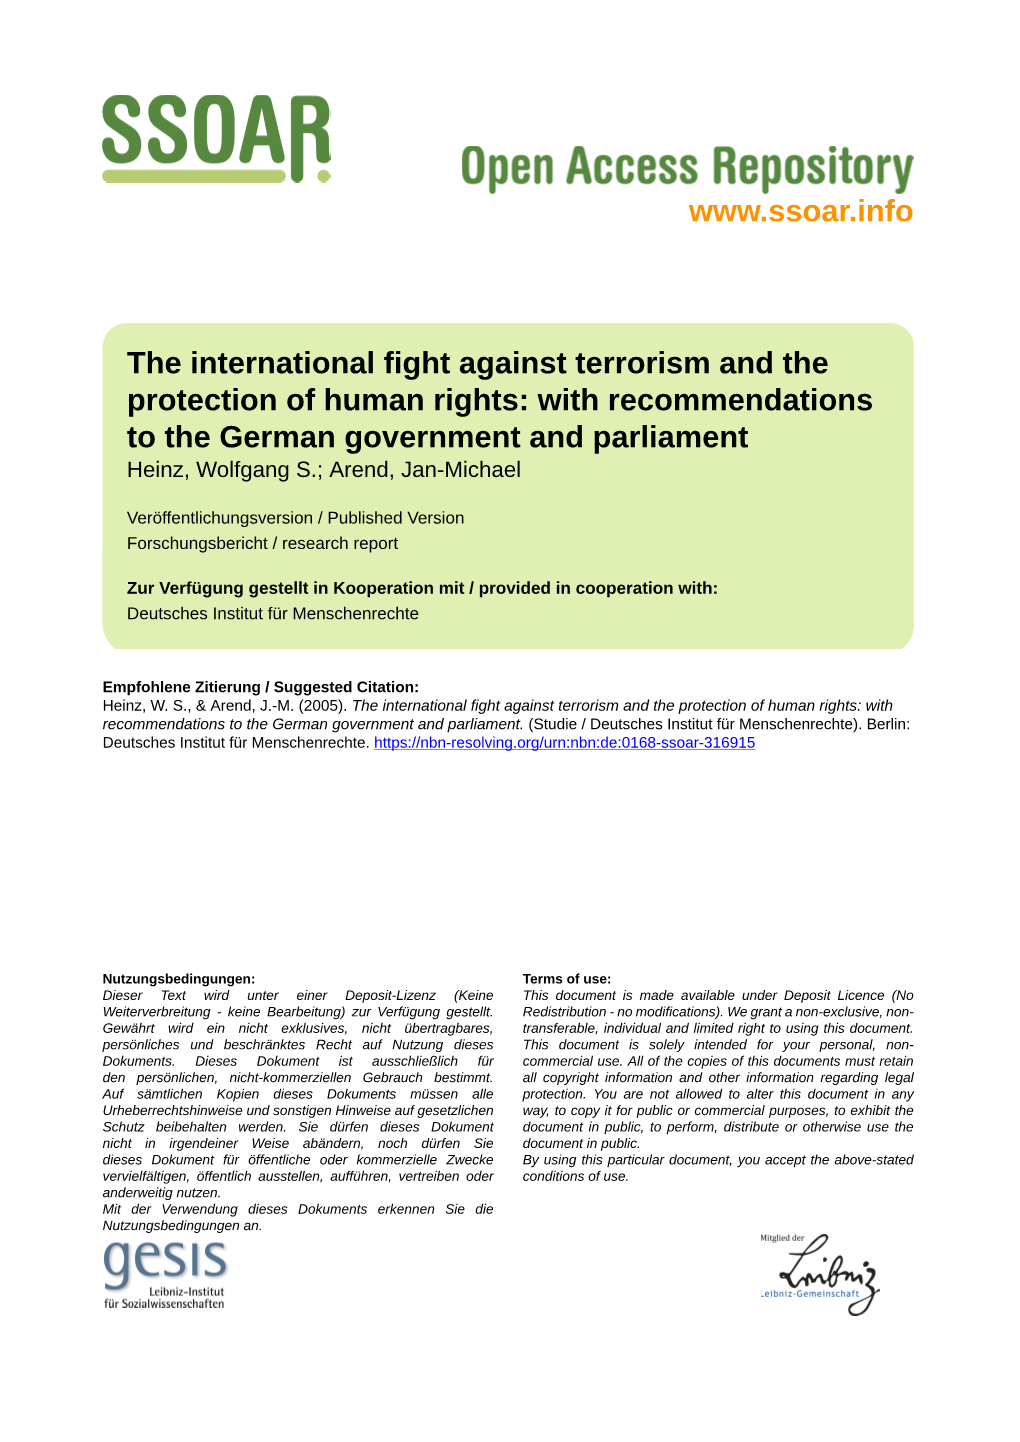 The International Fight Against Terrorism and the Protection of Human Rights